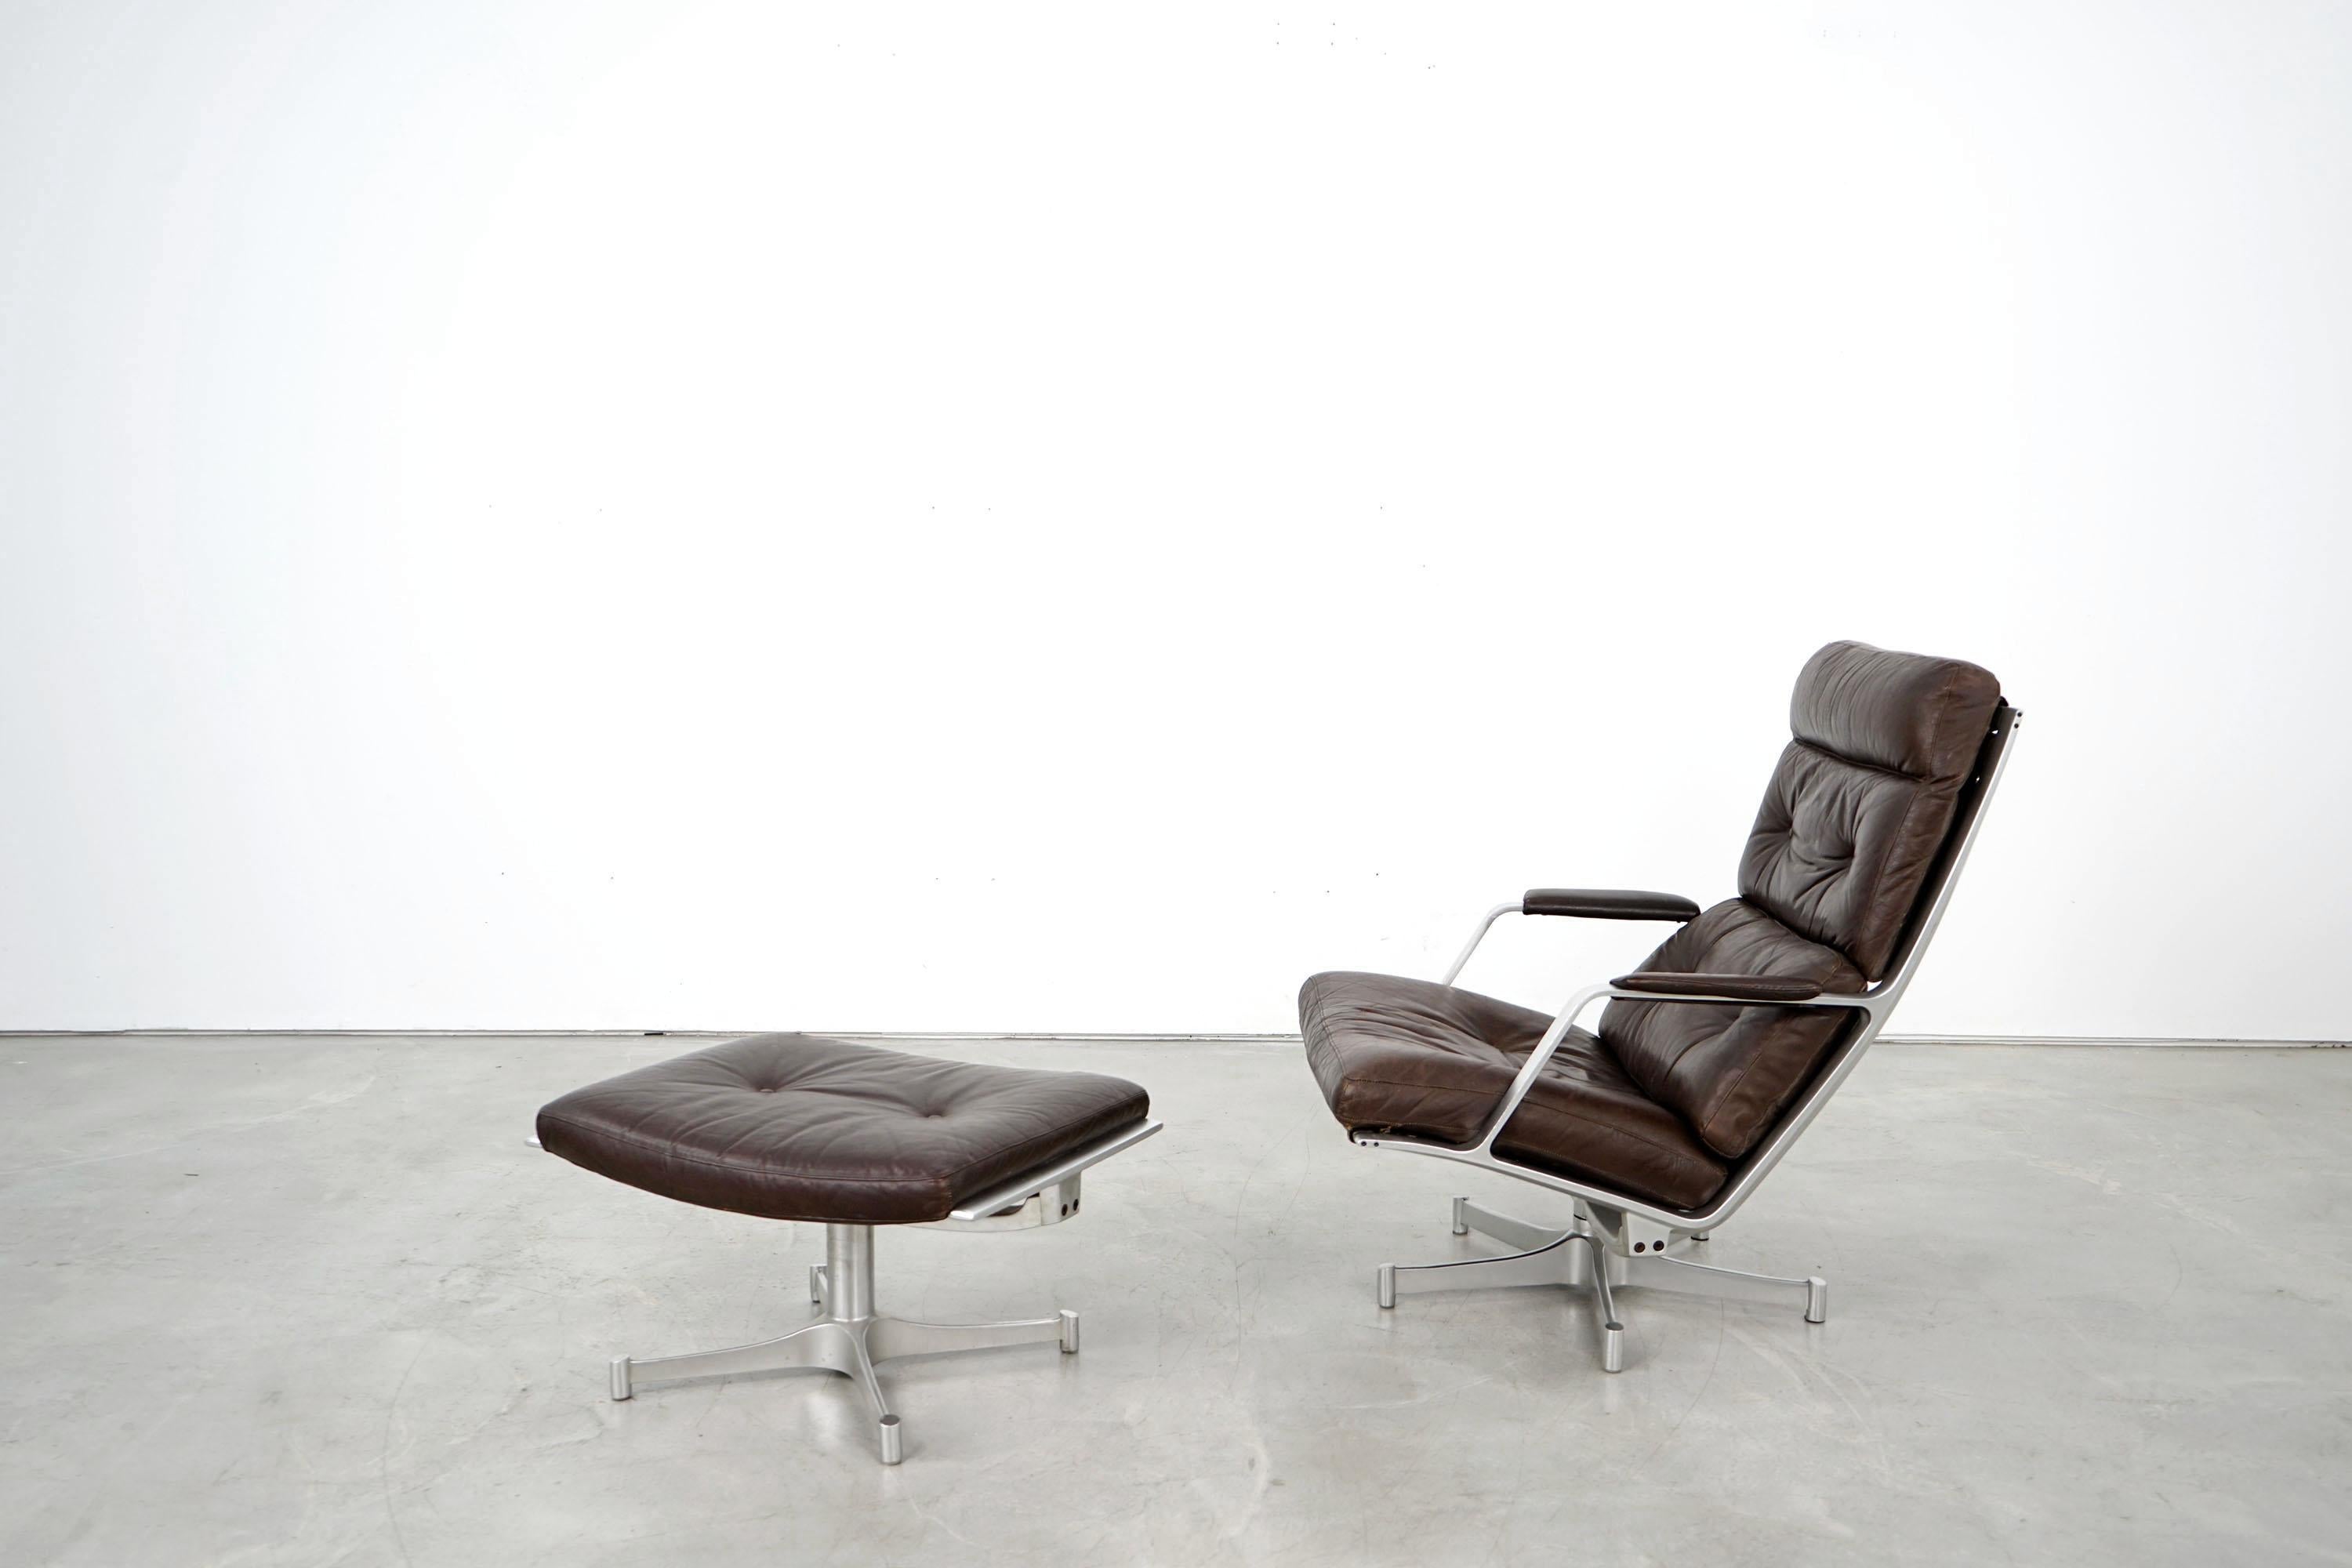 Elegant lounge chair and ottoman by Preben Fabricius and Jørgen Kastholm for Kill International. The model FK 85 with leather upholstery dates back to the 1960s and was produced in Germany. Over time, the leather has developed a wonderful patina.